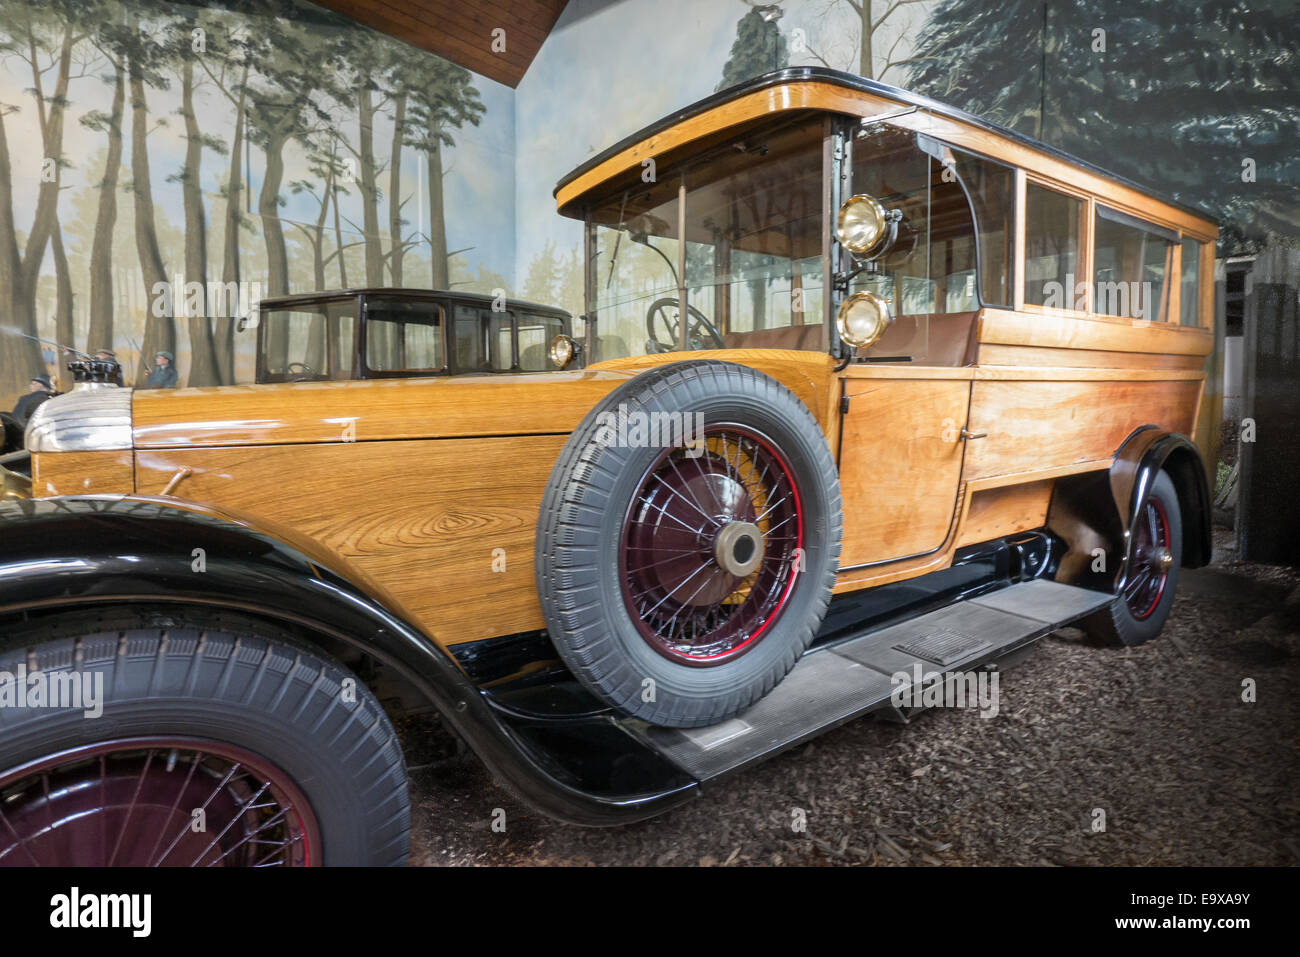 Daimler shooting brake 57hp, 1924, commissioned by George V, king of UK. Stock Photo